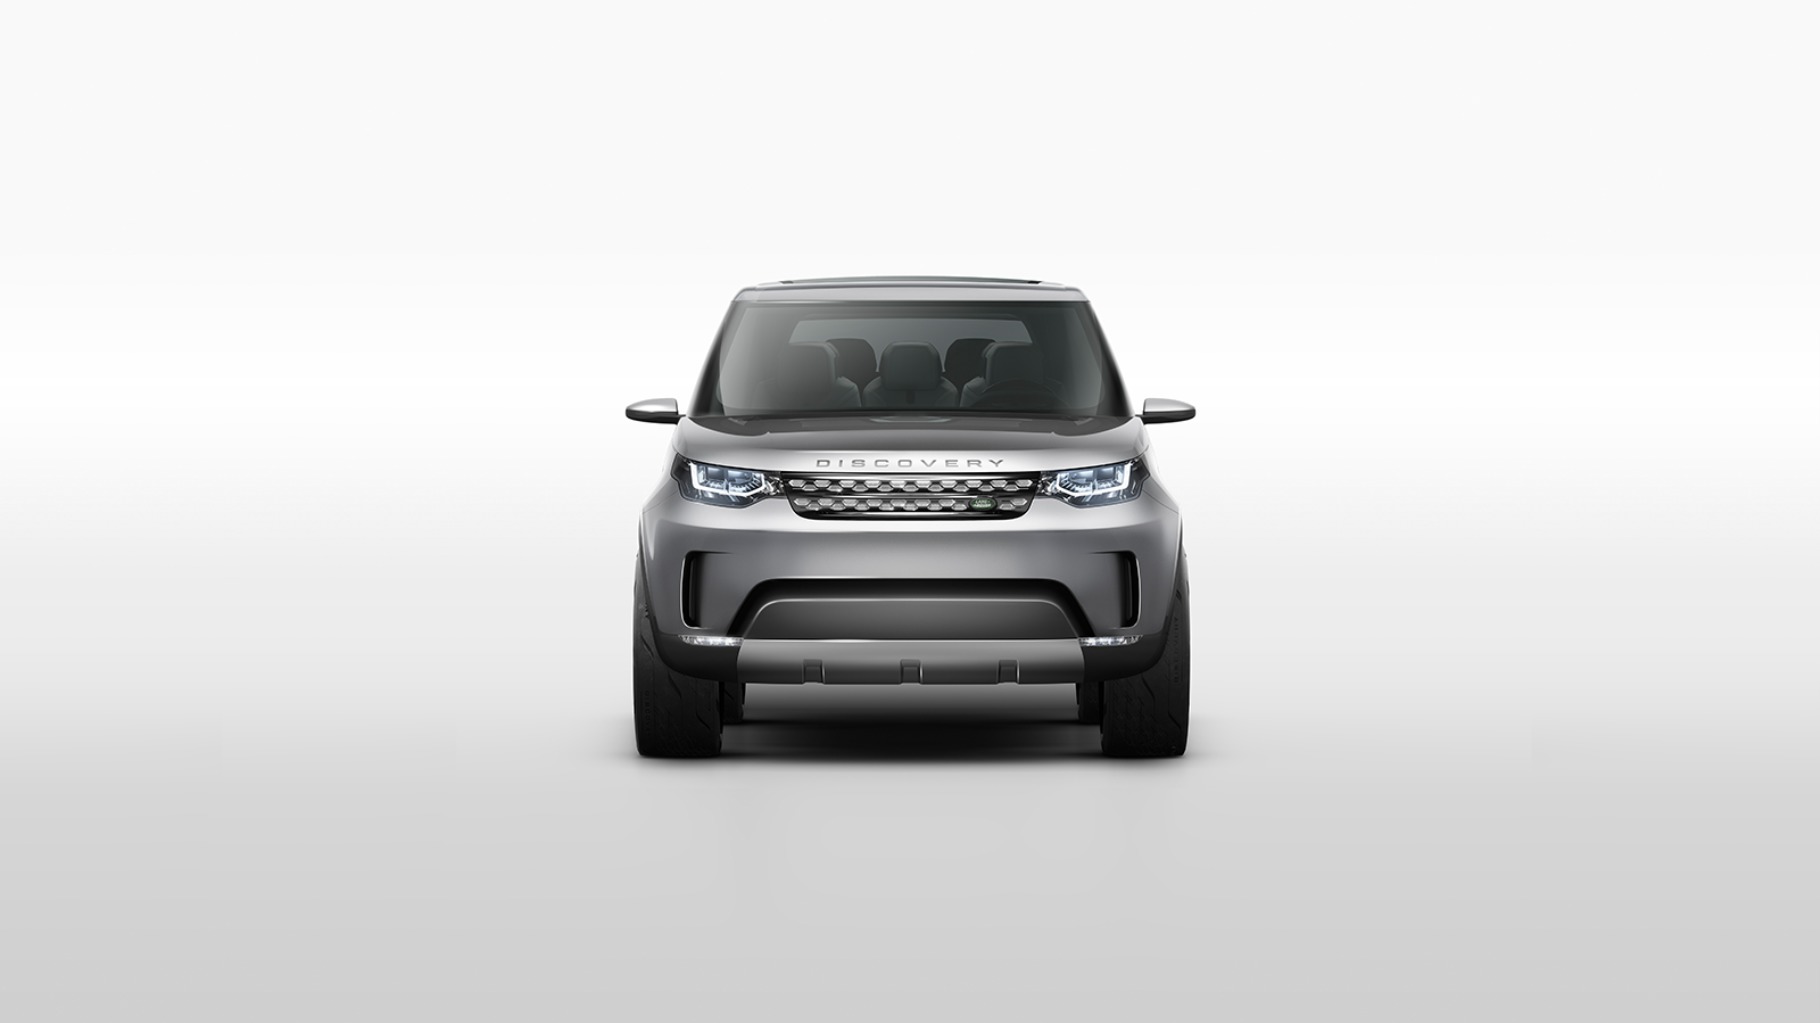 Land Rover New Discovery Vision front cross view